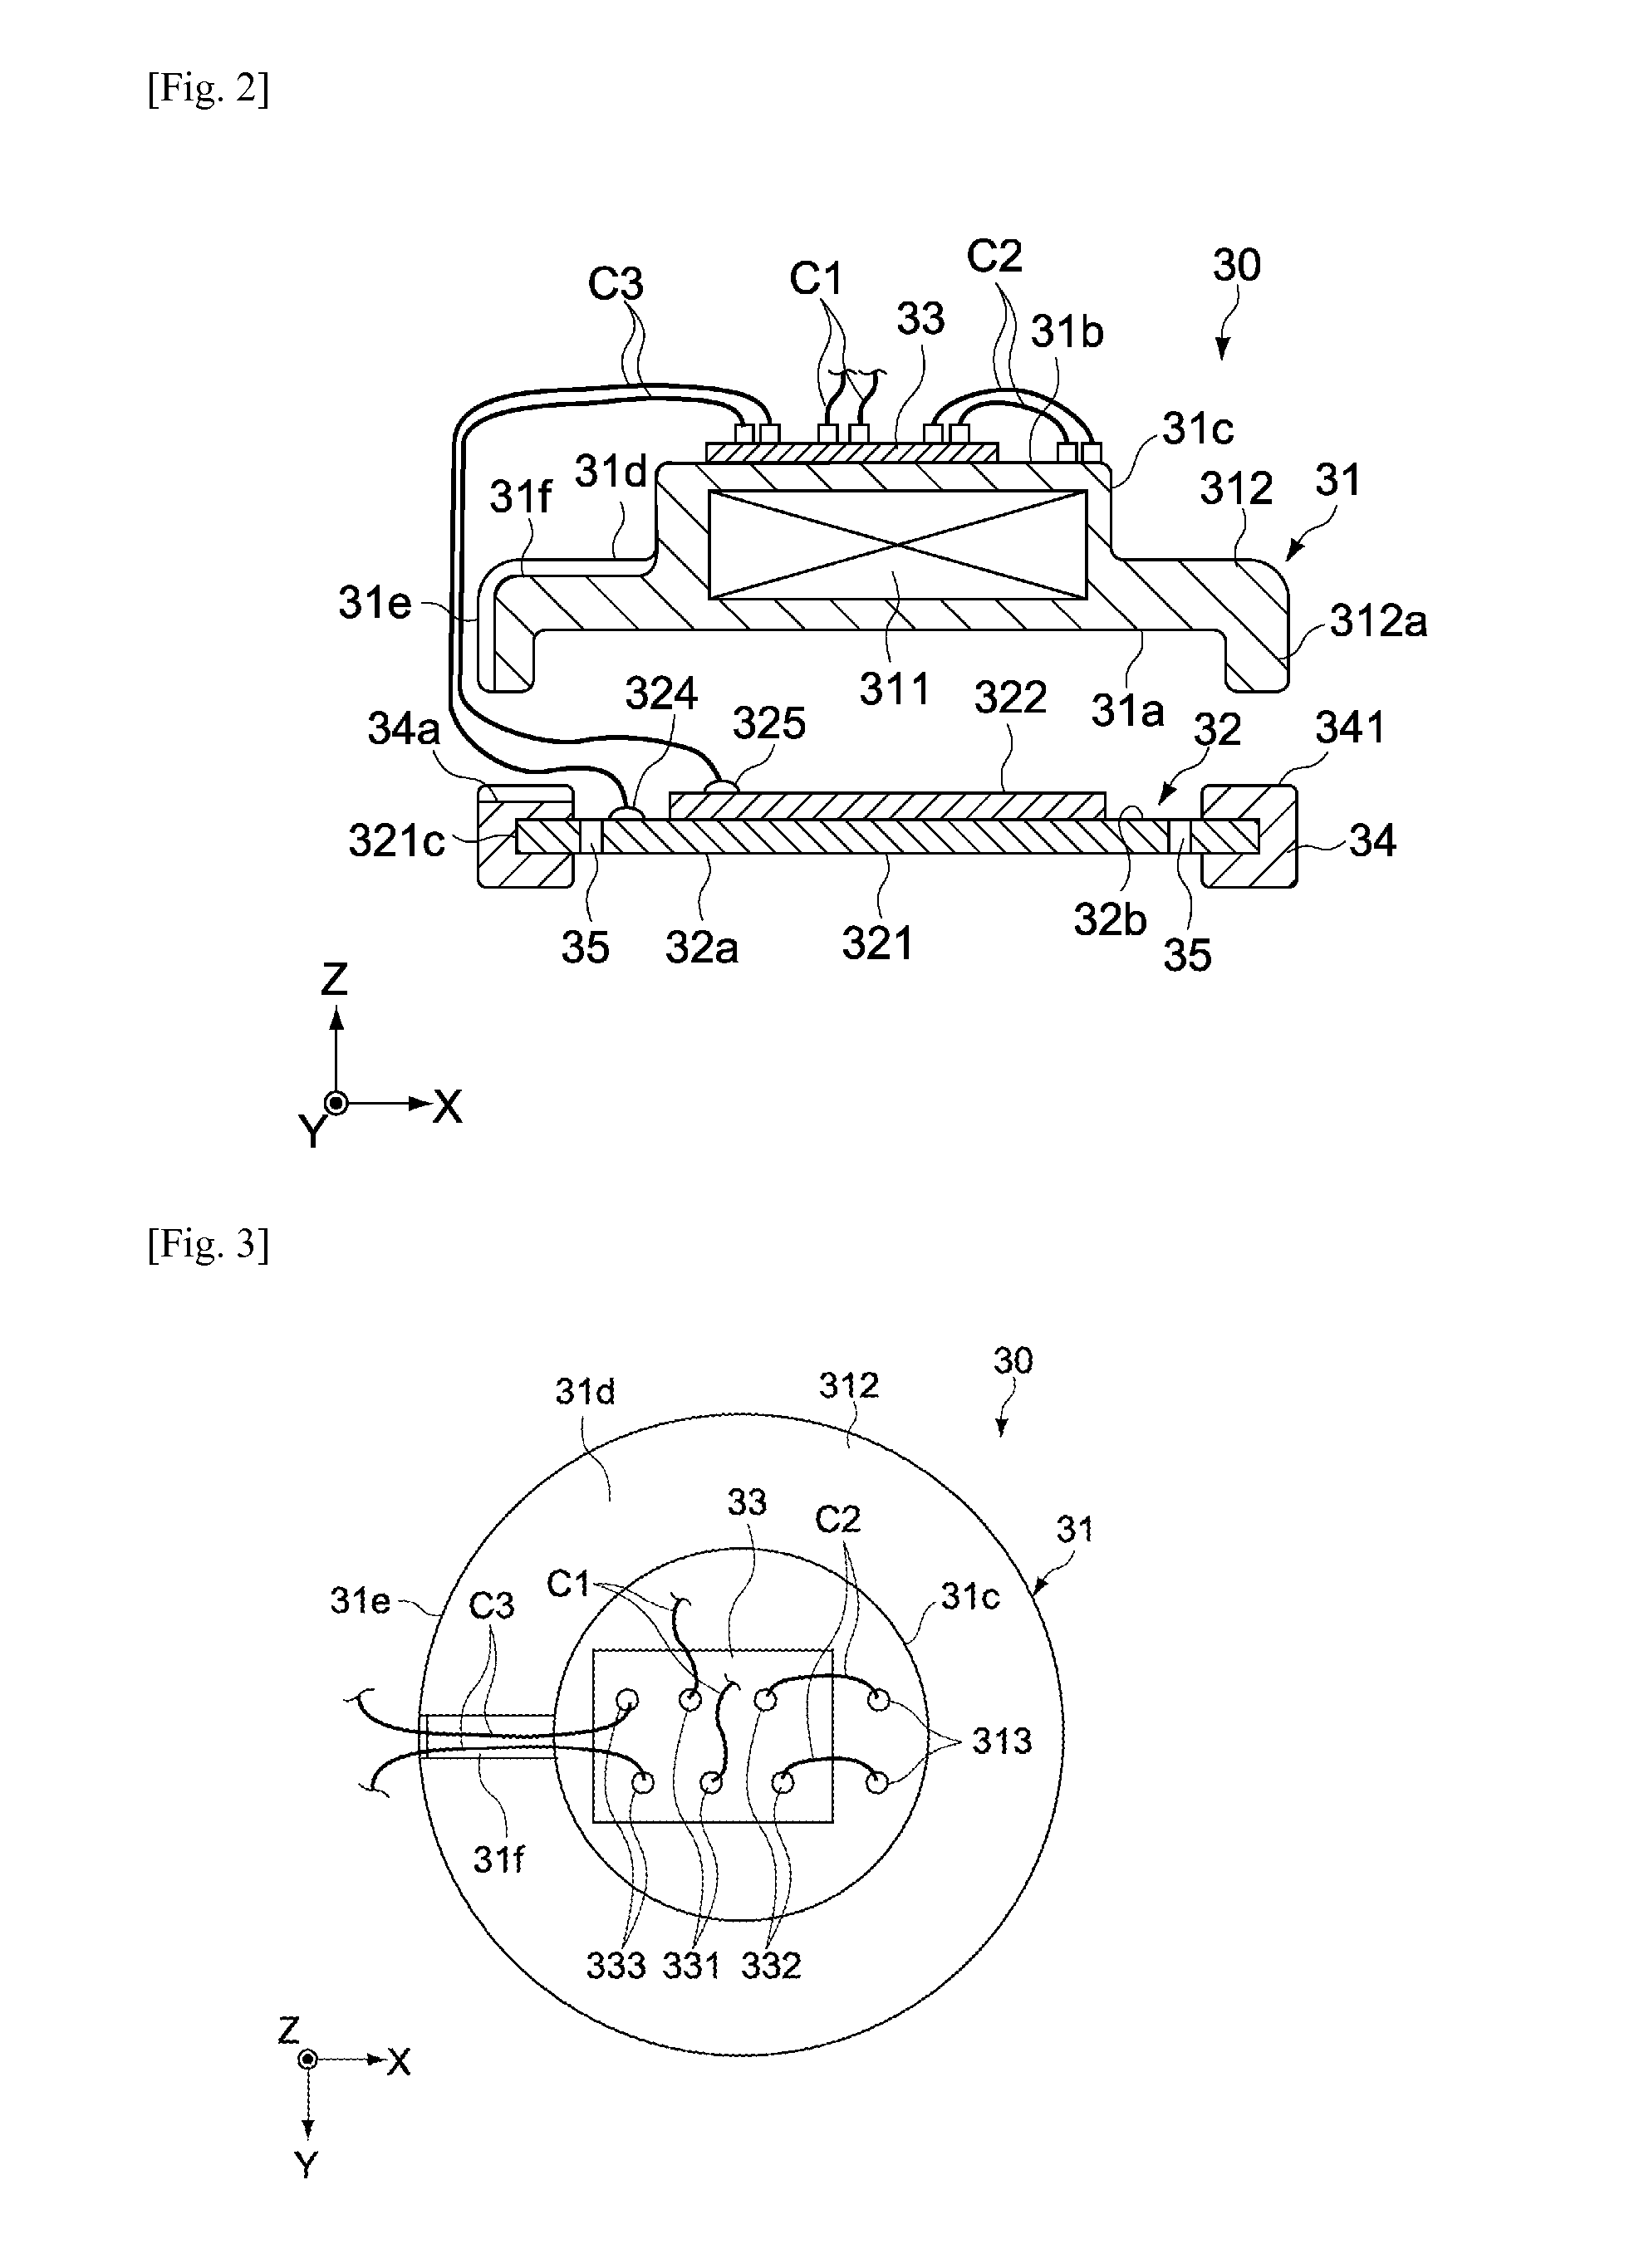 Electroacoustic converter